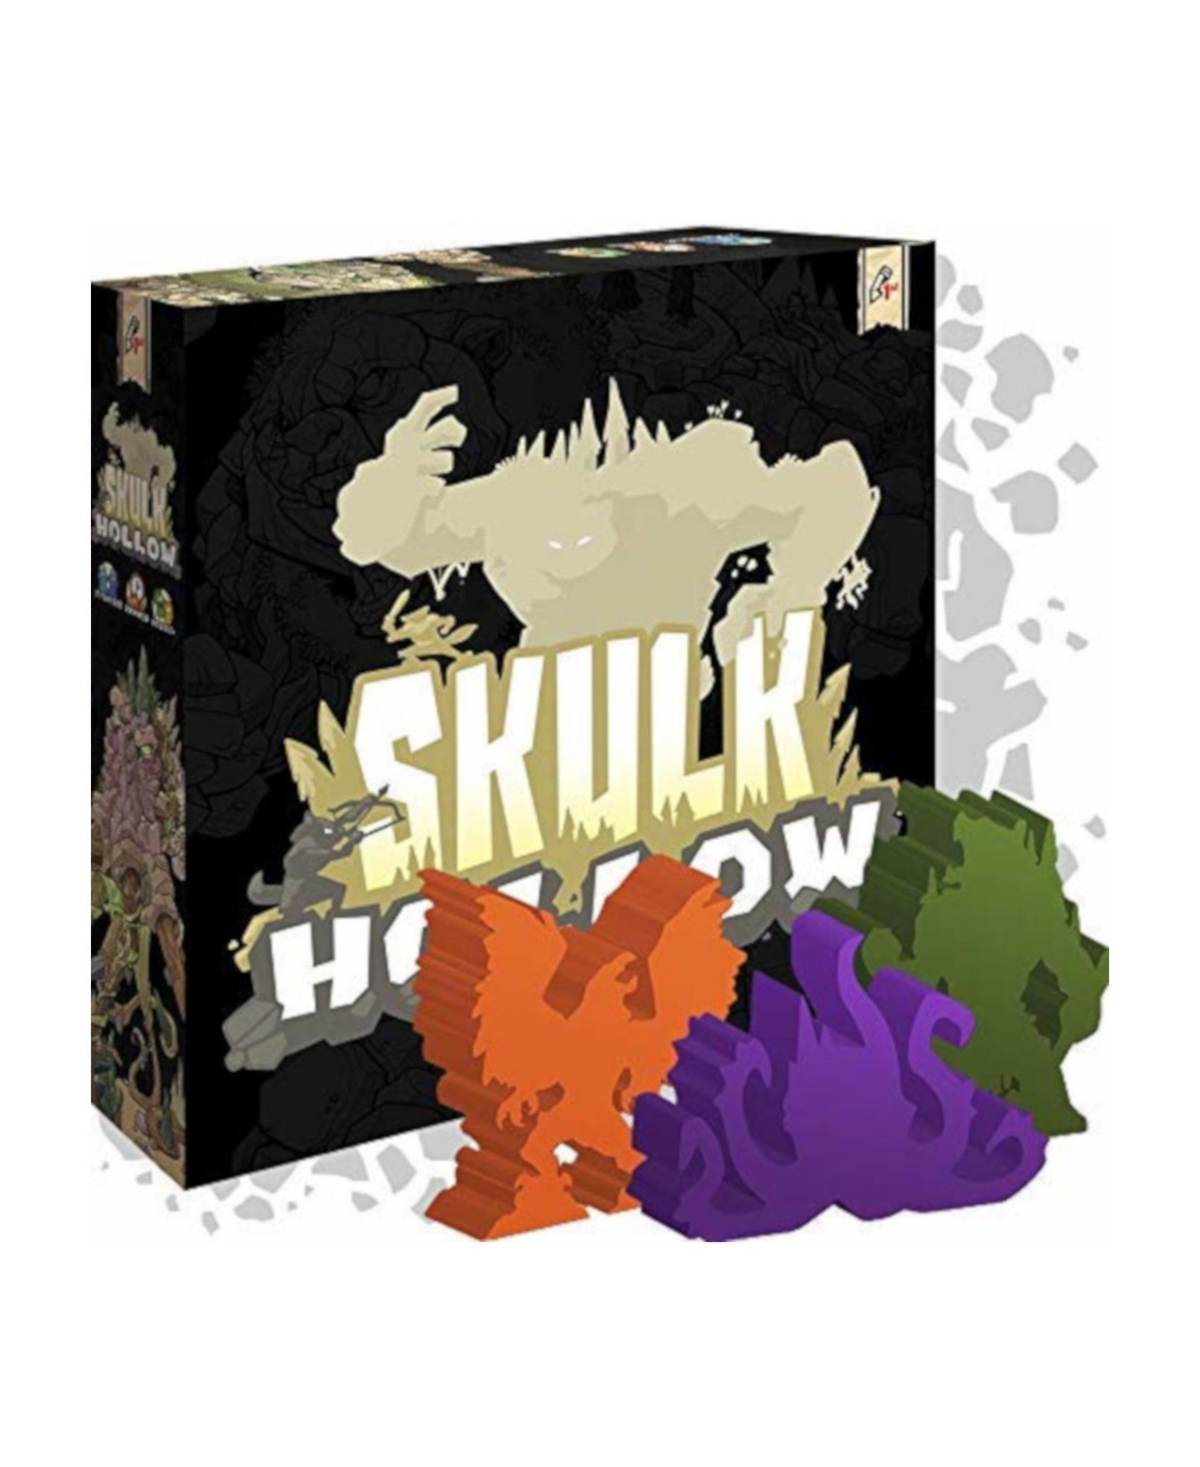 Shop Masterpieces Puzzles Pencil First Games, Llc Skulk Hollow In Multi